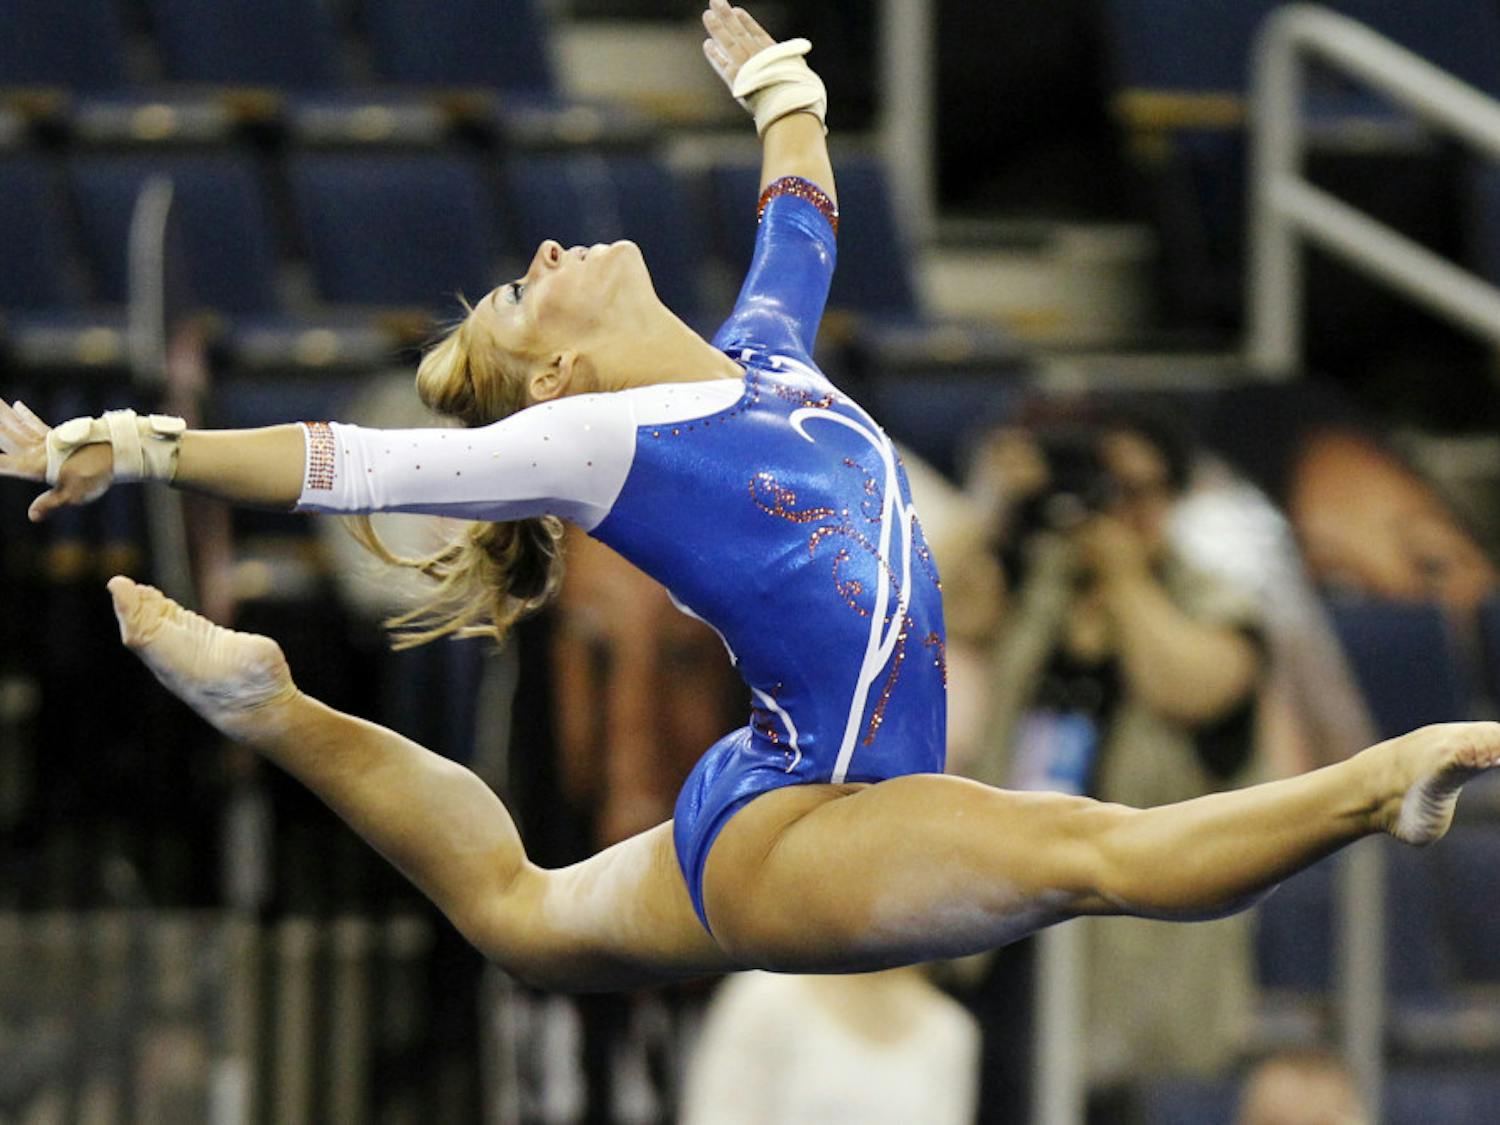 Florida gymnast Randy Stageberg competes in the floor exercise during the semifinals of the NCAA college women's gymnastics championships Friday. Stageberg received a point deduction after stepping out of bounds during floor exercise, resulting in a 9.75 score.